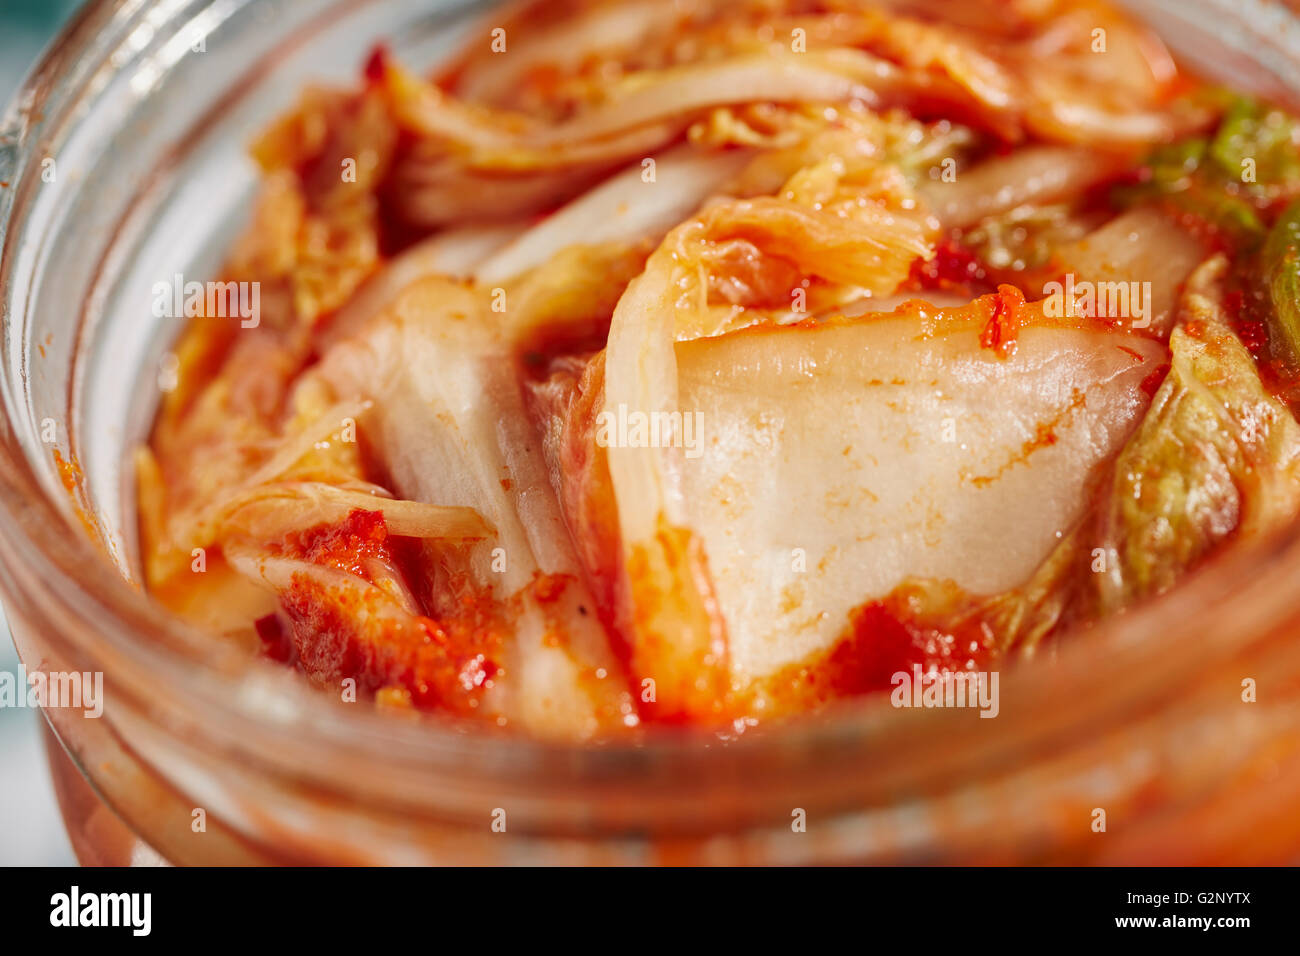 A jar of kimchi; spicy Korean preseved vegetables Stock Photo